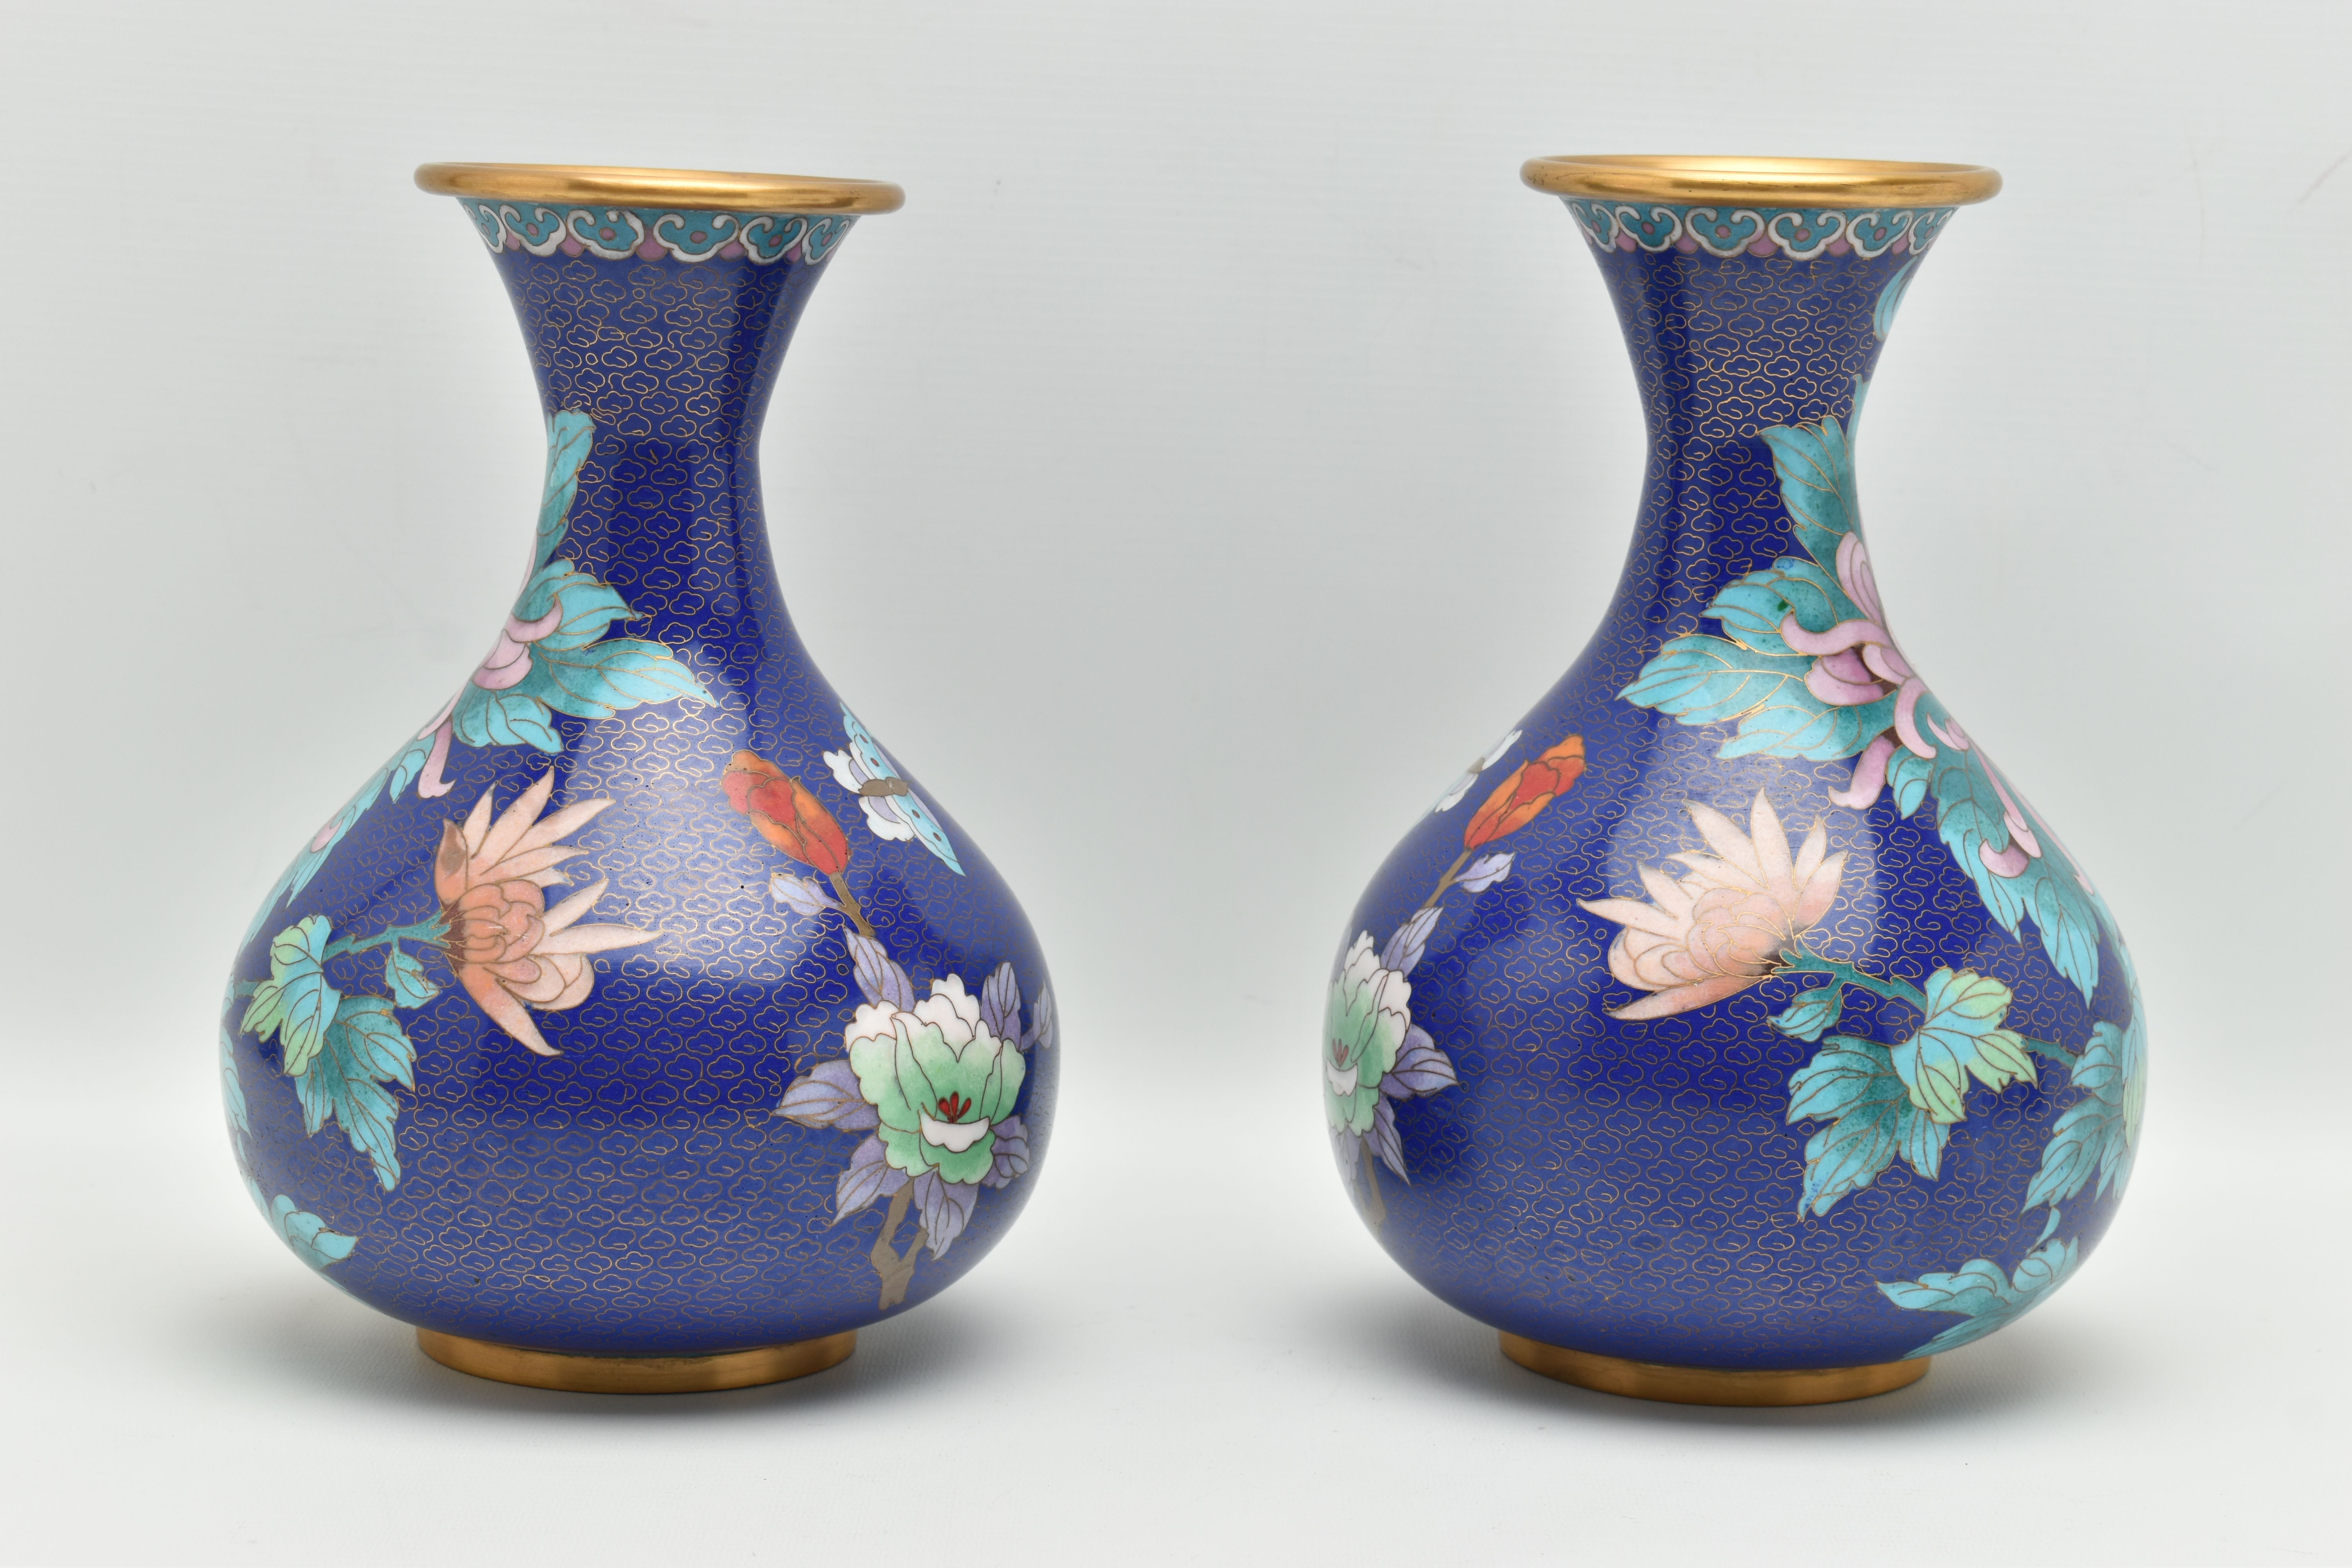 A PAIR OF MODERN CHINESE CLOISONNE VASES OF BALUSTER FORM, the blue ground with flowers, foliage and - Image 3 of 5